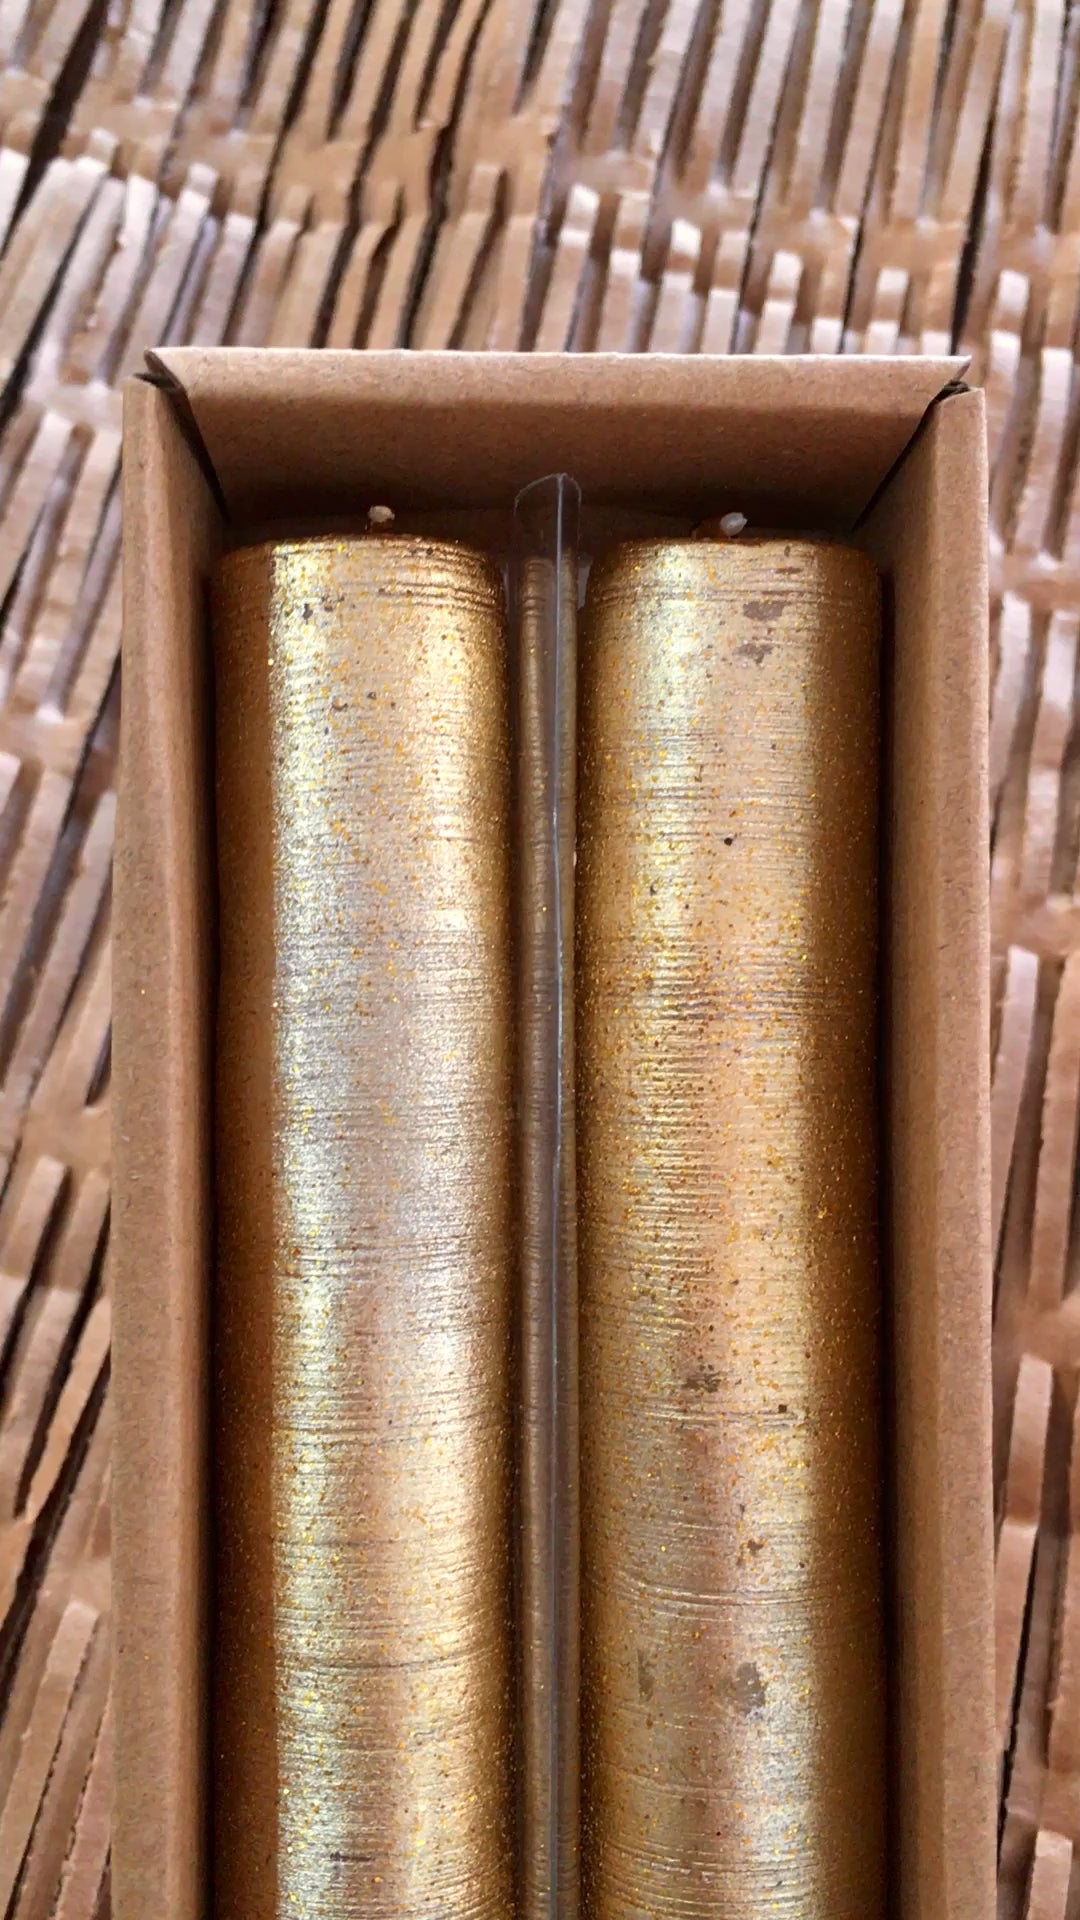 video showing glitter gold coating on candles